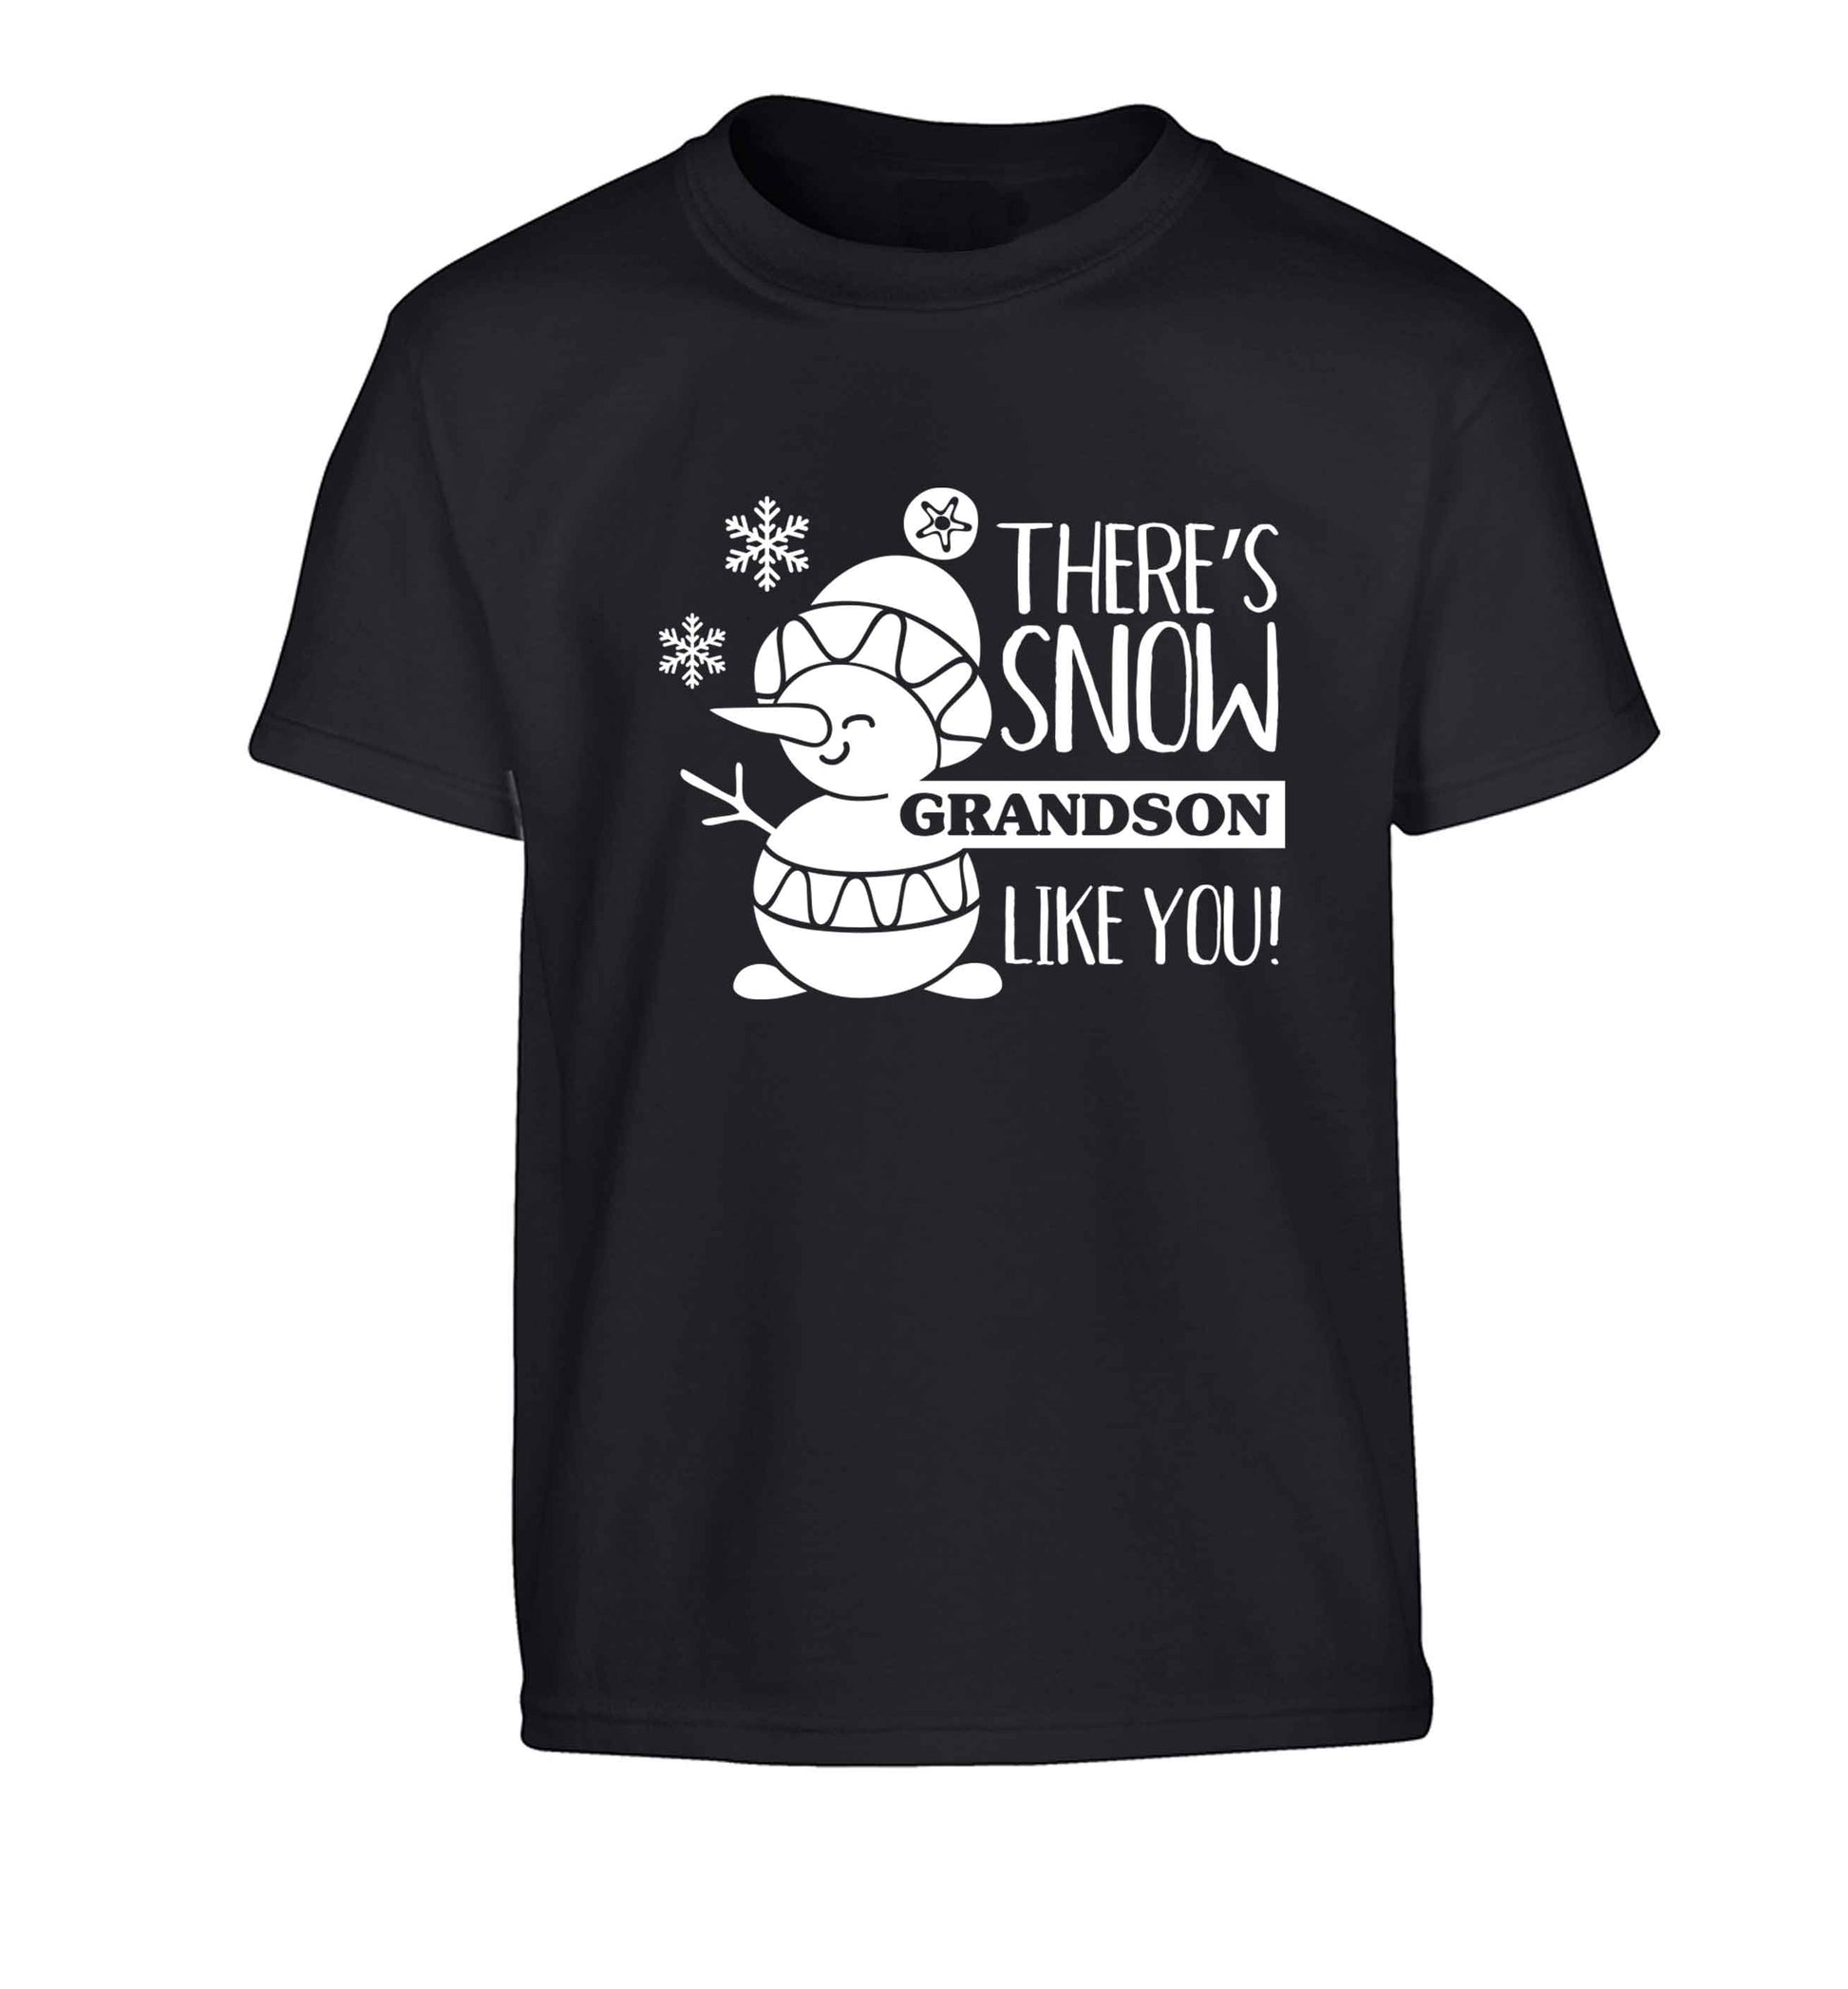 There's snow grandson like you Children's black Tshirt 12-13 Years